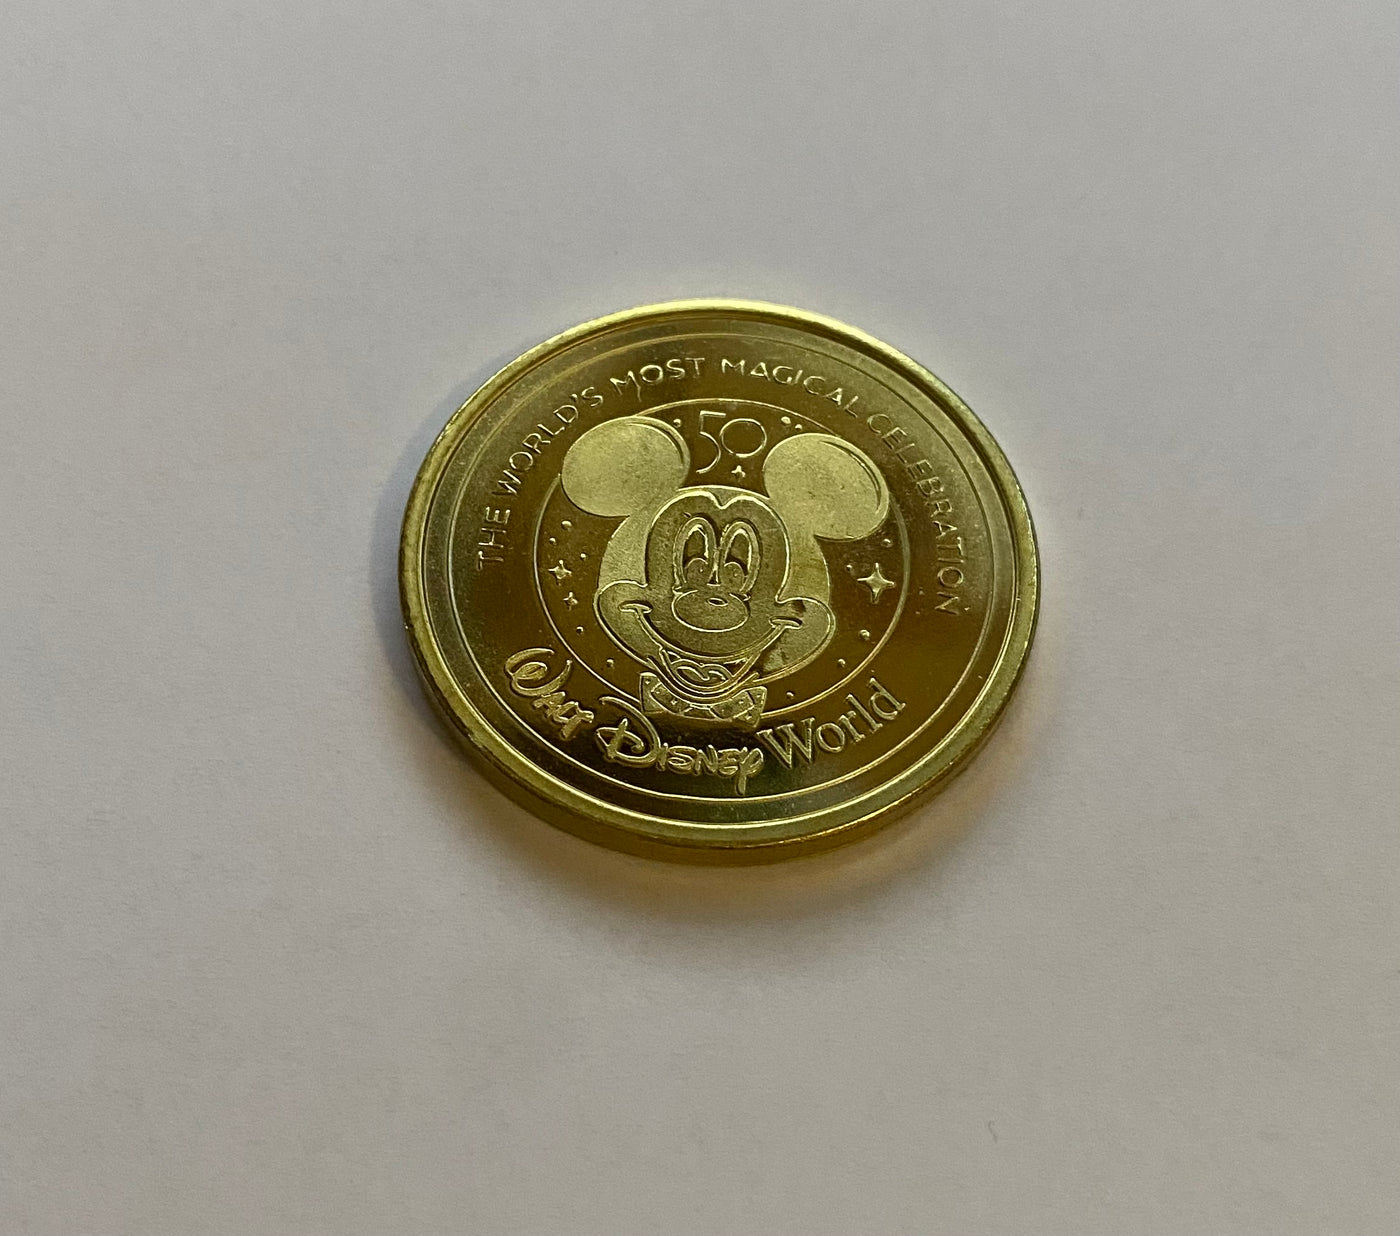 Disney Parks WDW 50th Magical Celebration Lumiere Coin Medallion New